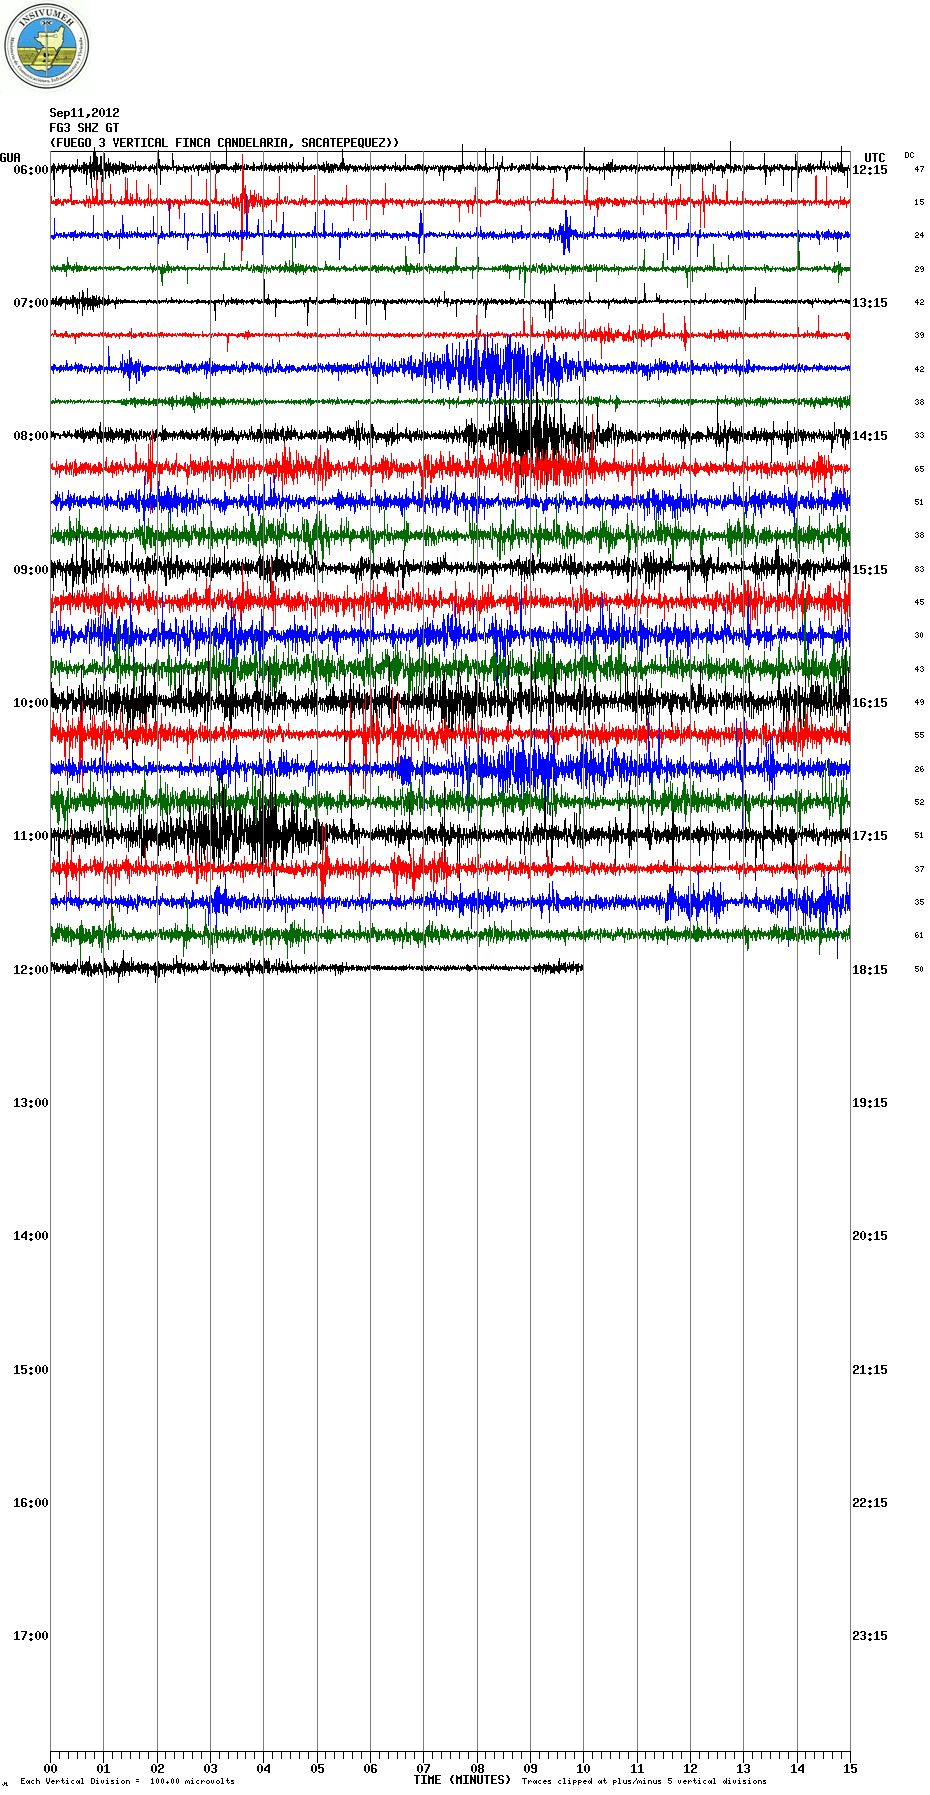 Current seismic signal from station FG3